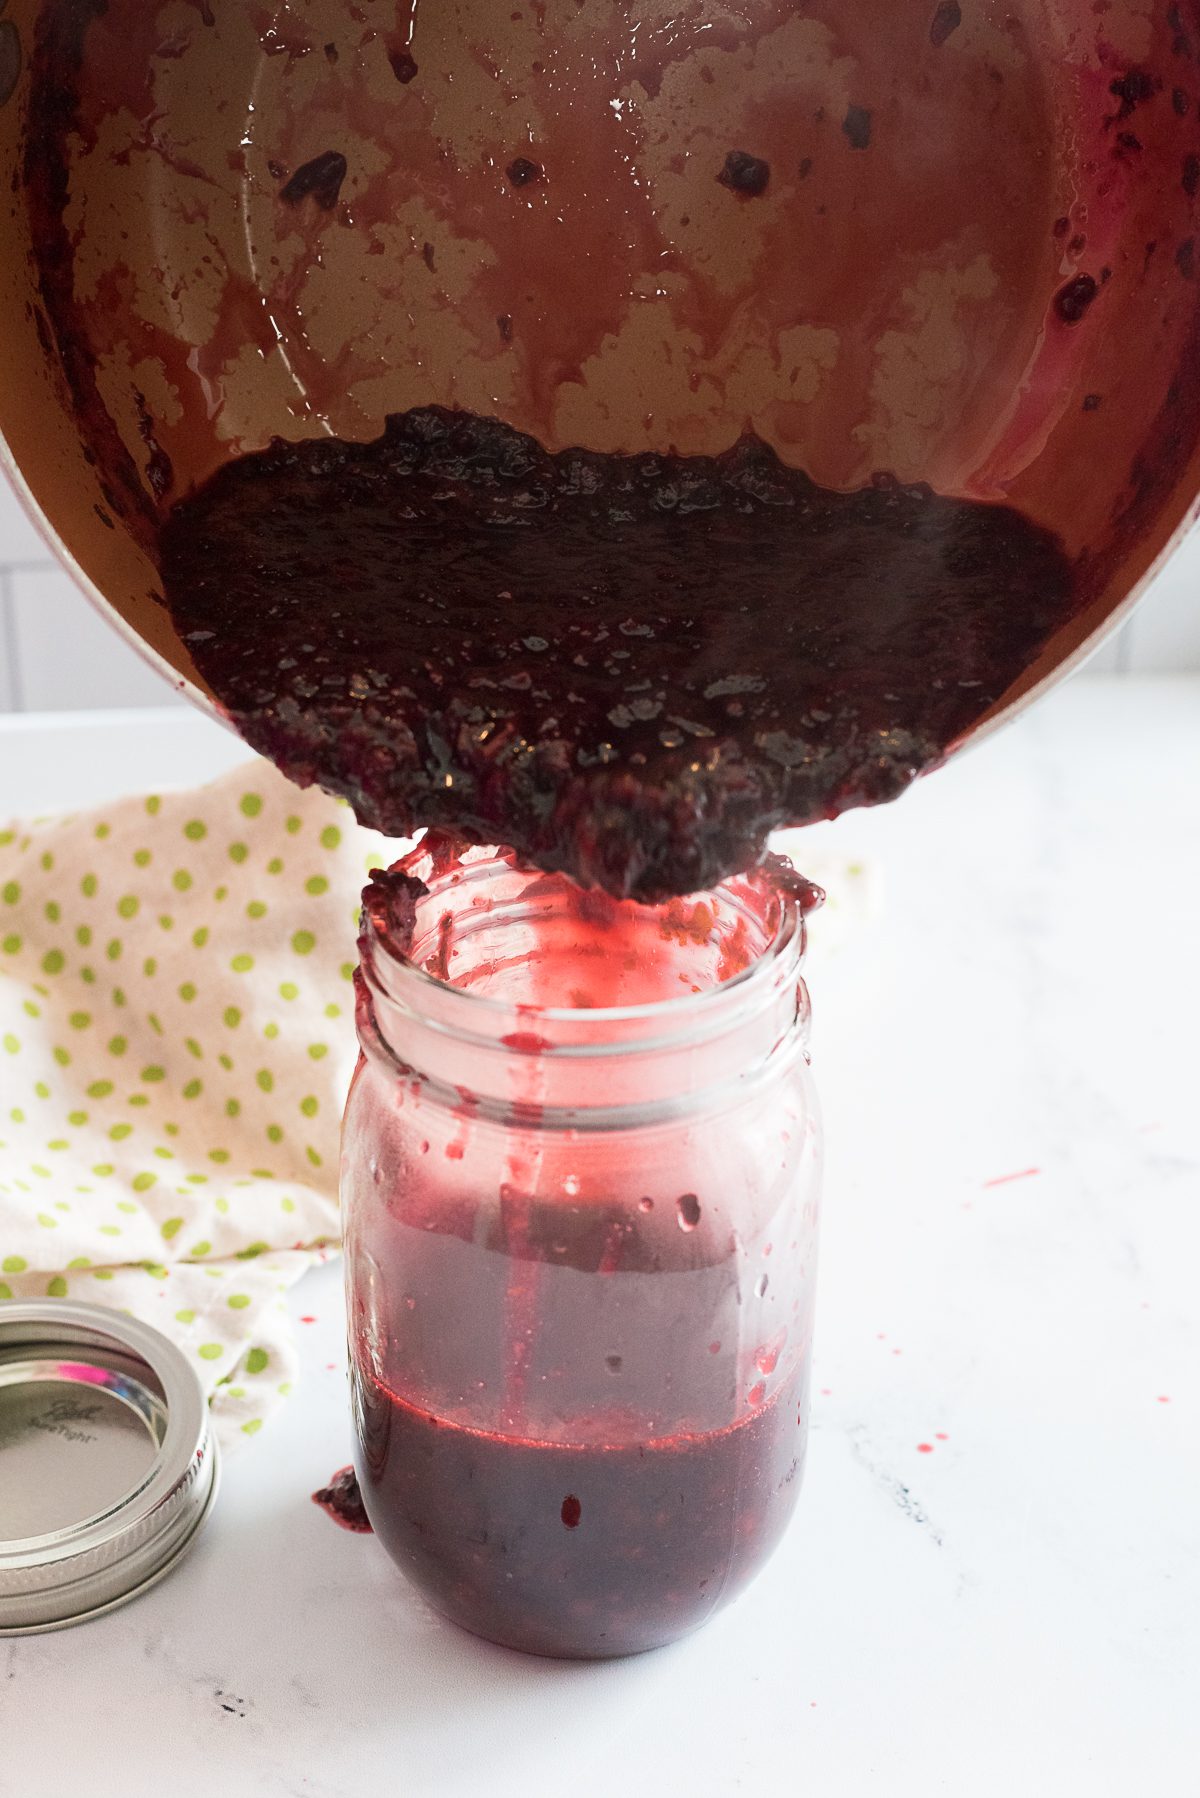 Jam made with blackberries and basil